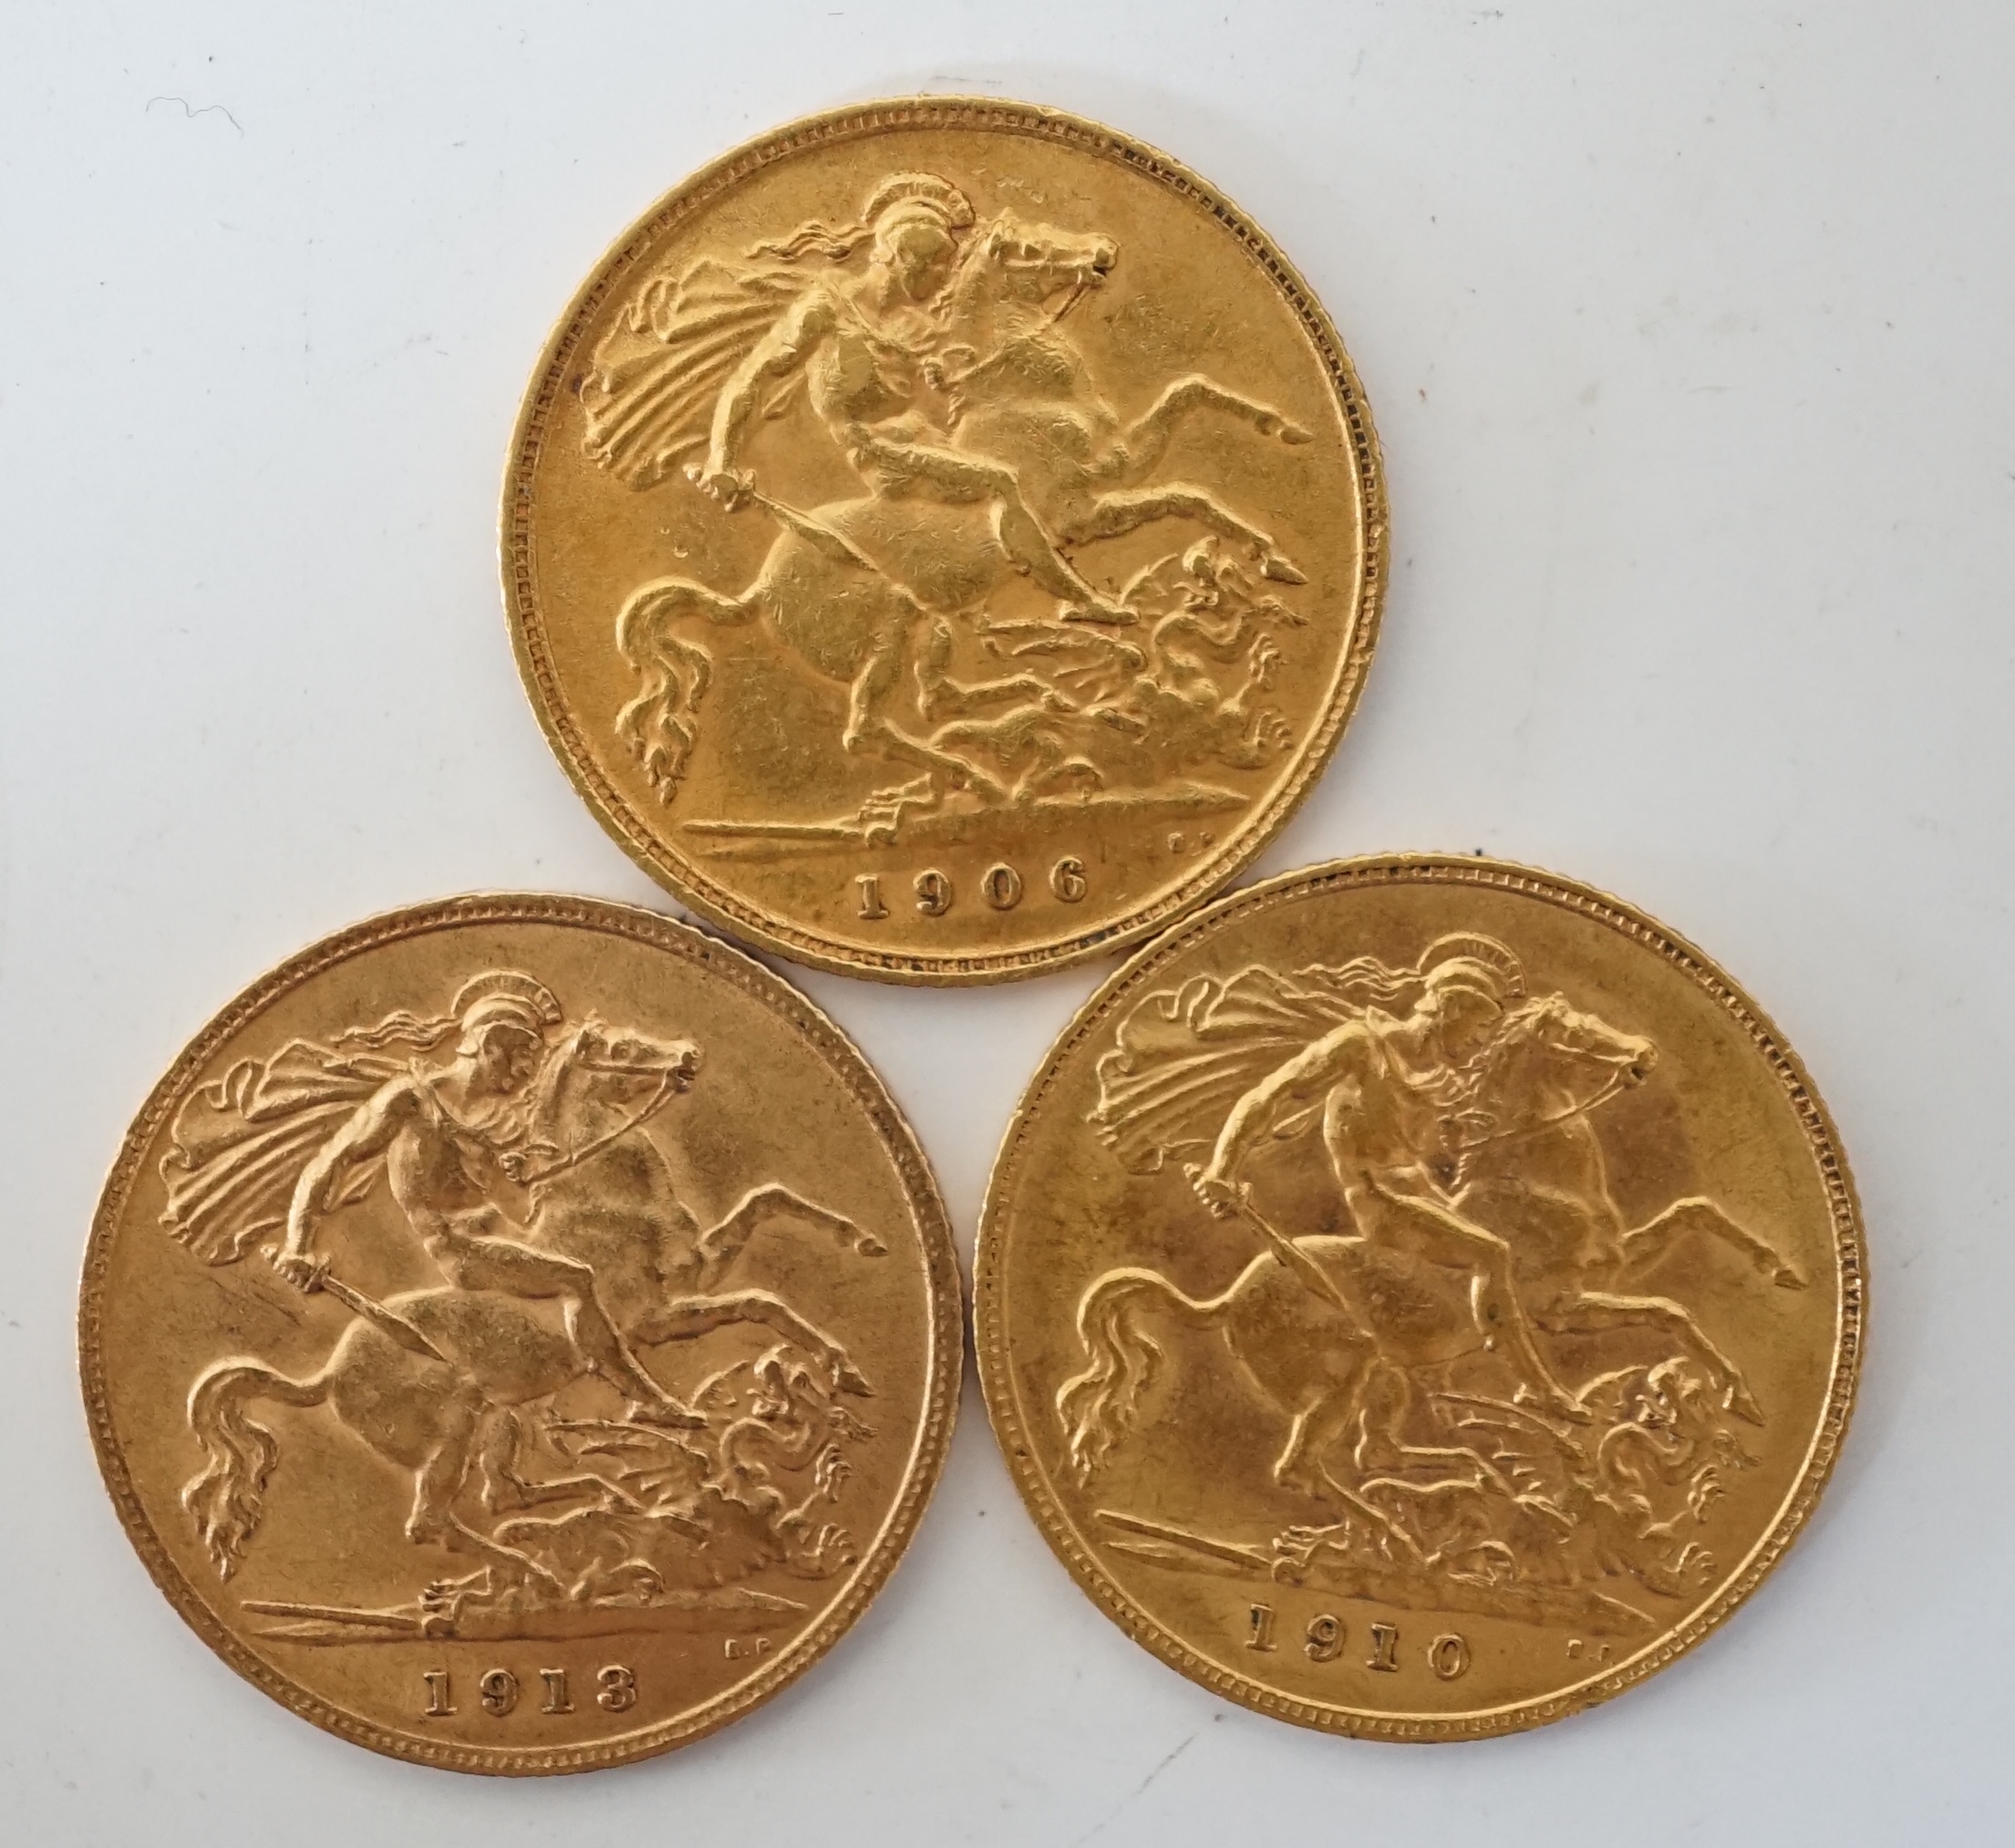 British gold coins, two Edward VII half sovereigns, 1906, good VF and 1910, EF, both (S3969) and a George V half sovereign, 1913 (S4006), EF (3)